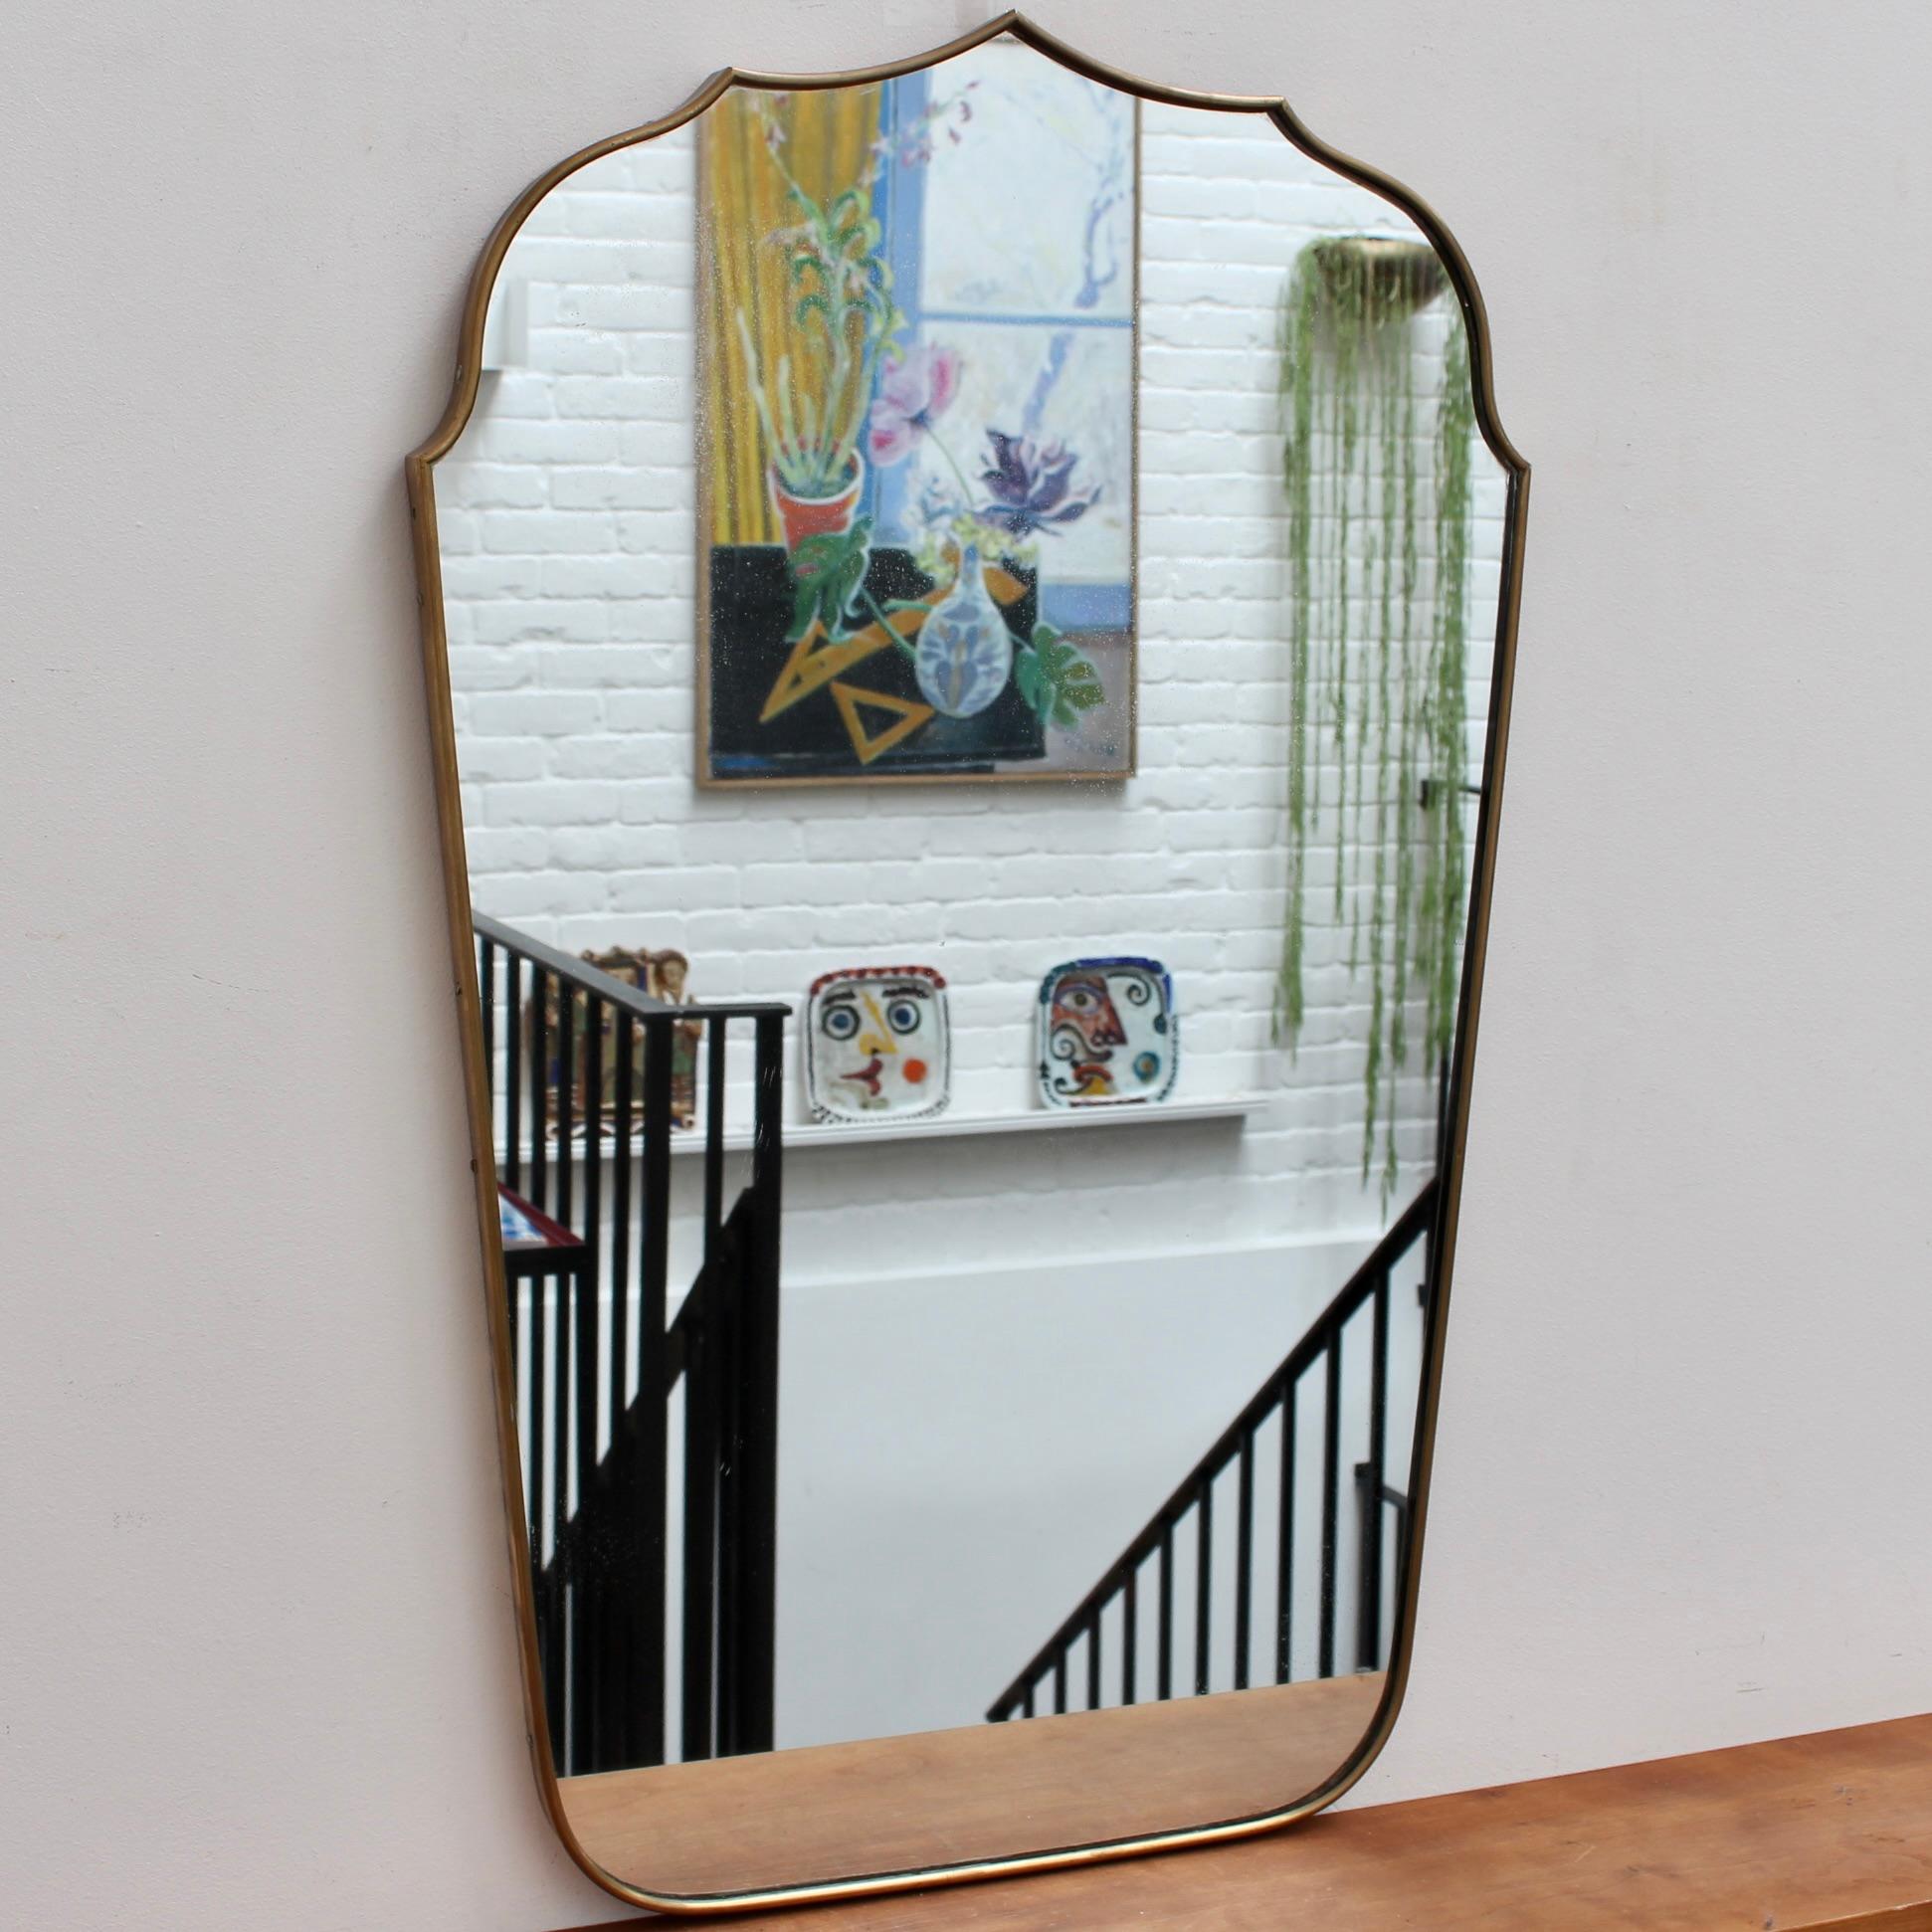 Mid-Century Italian wall mirror with brass frame (circa 1950s). This mirror incorporates a somewhat Arabesque form at the top with elegant curves and distinct points. It has charm, shape and a unique vintage personality. The glass as shown in the